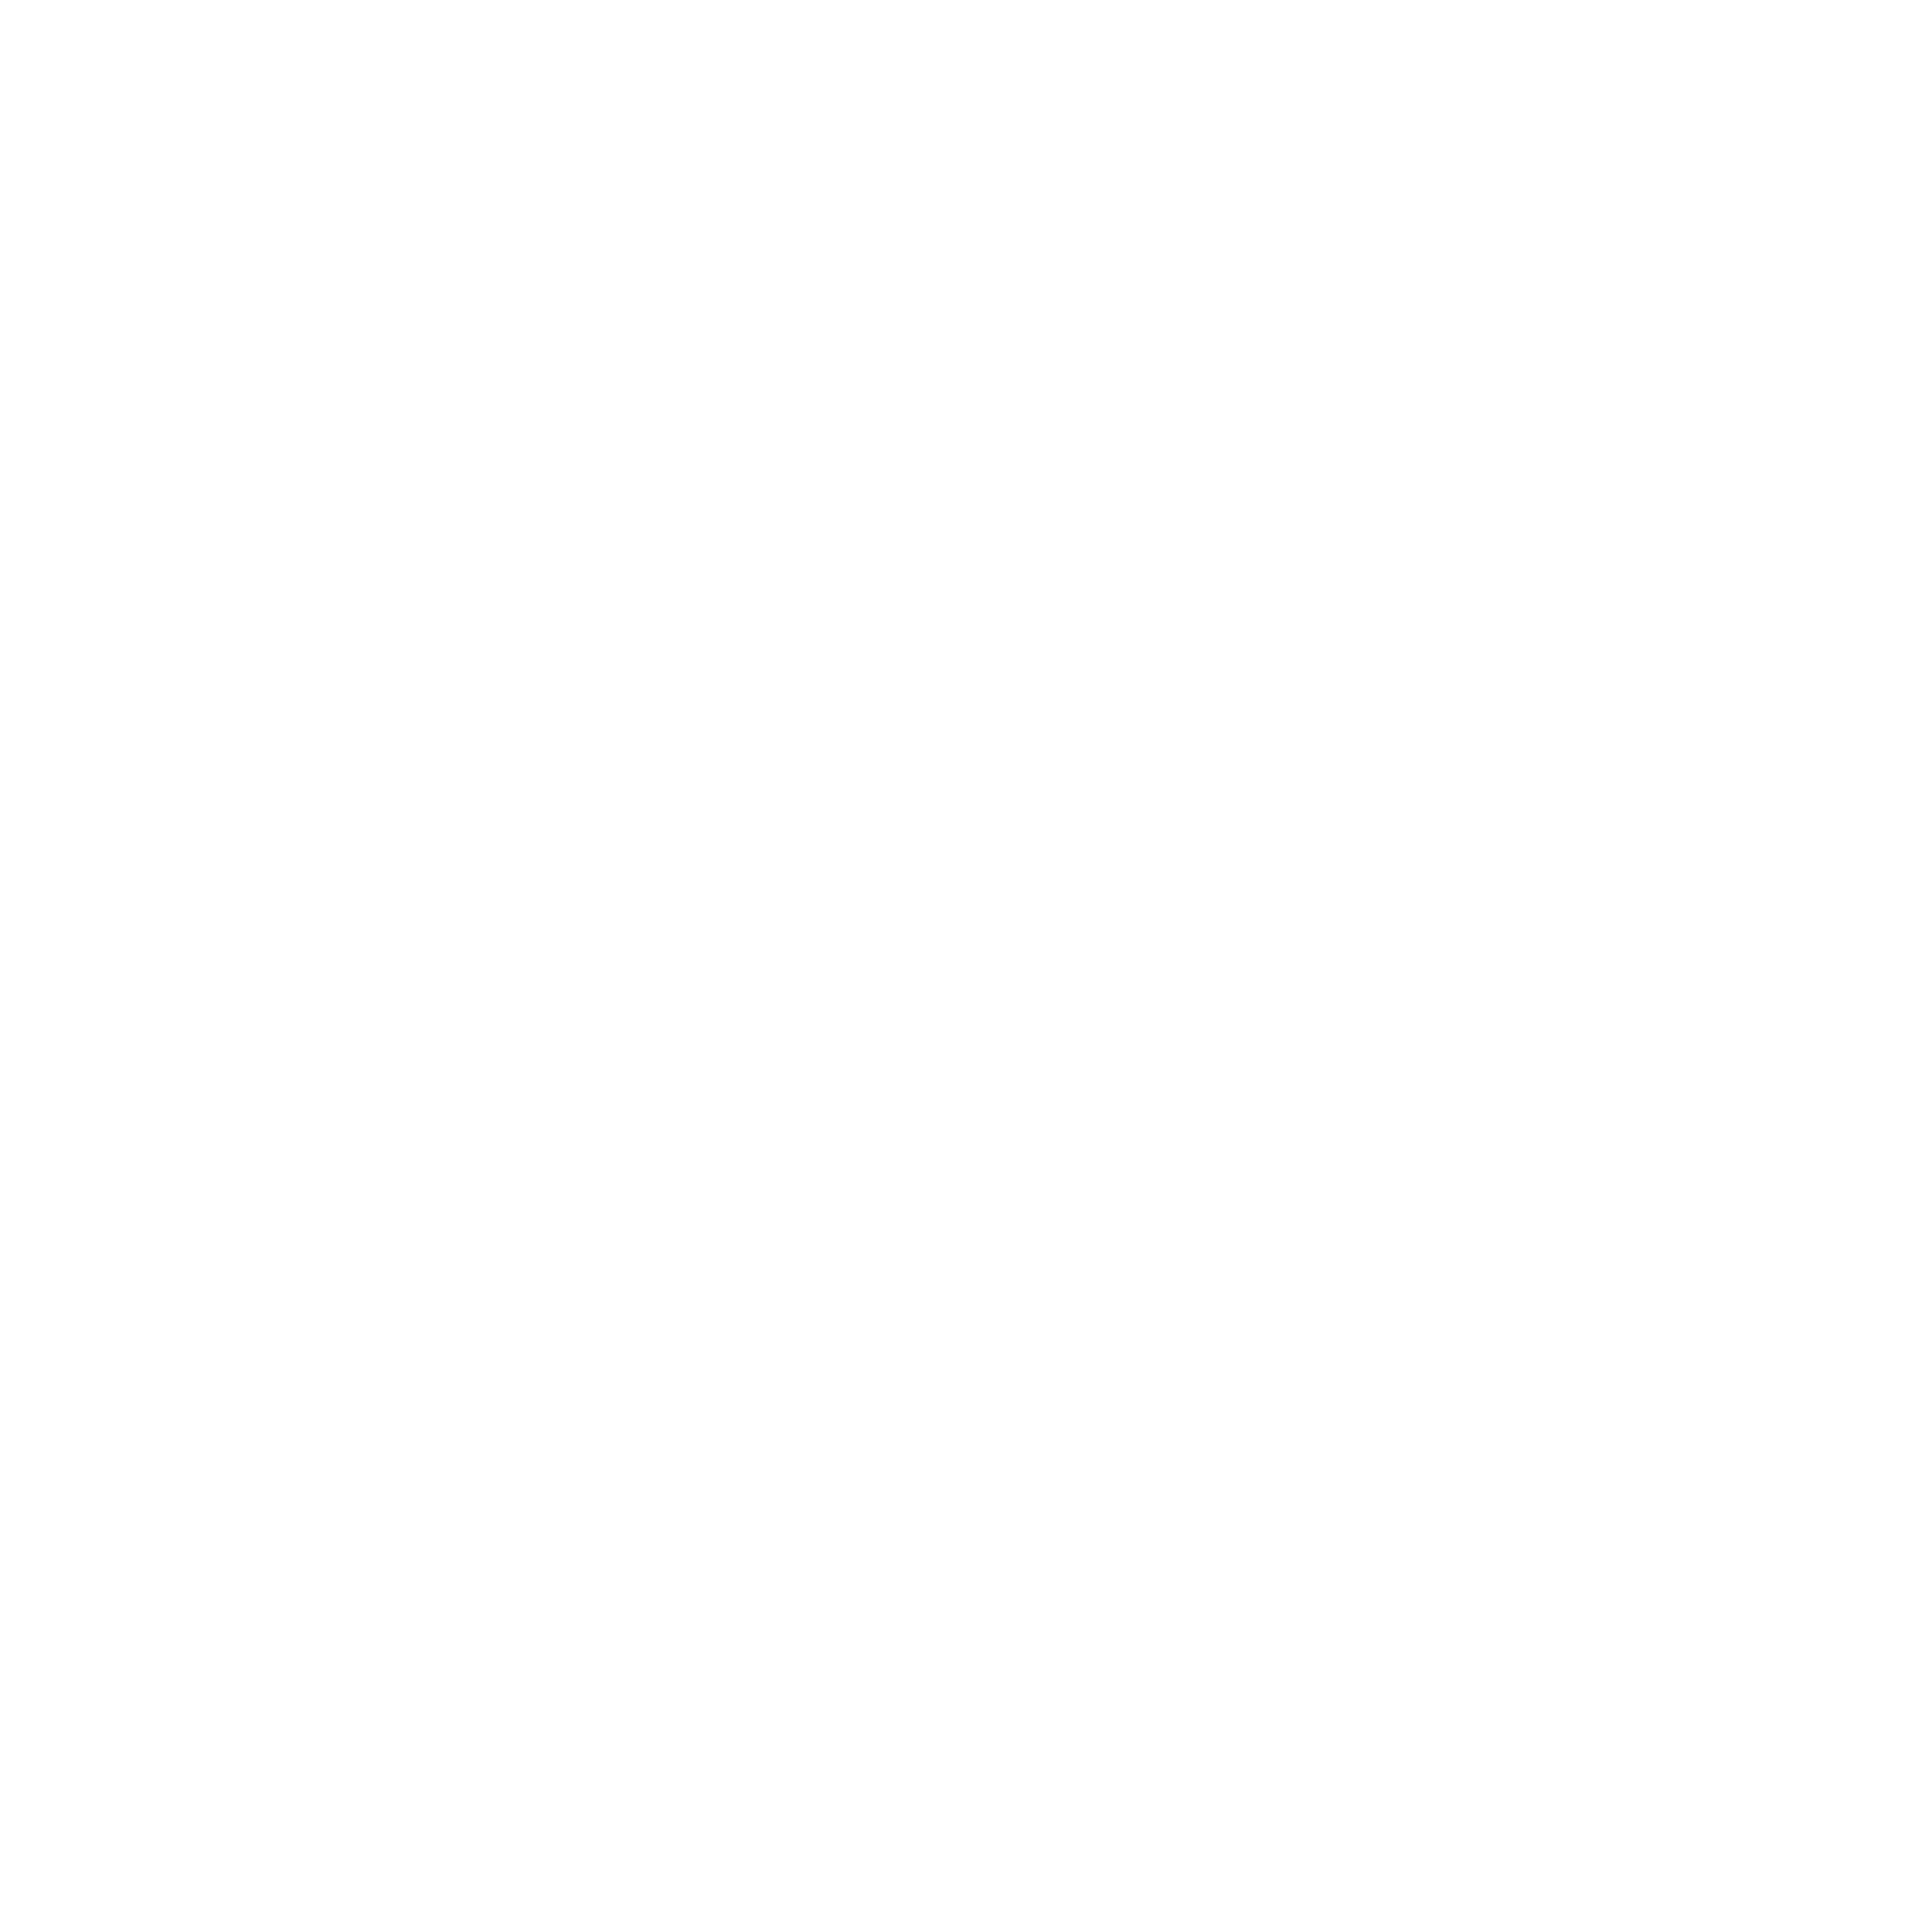 Two Hands Icon